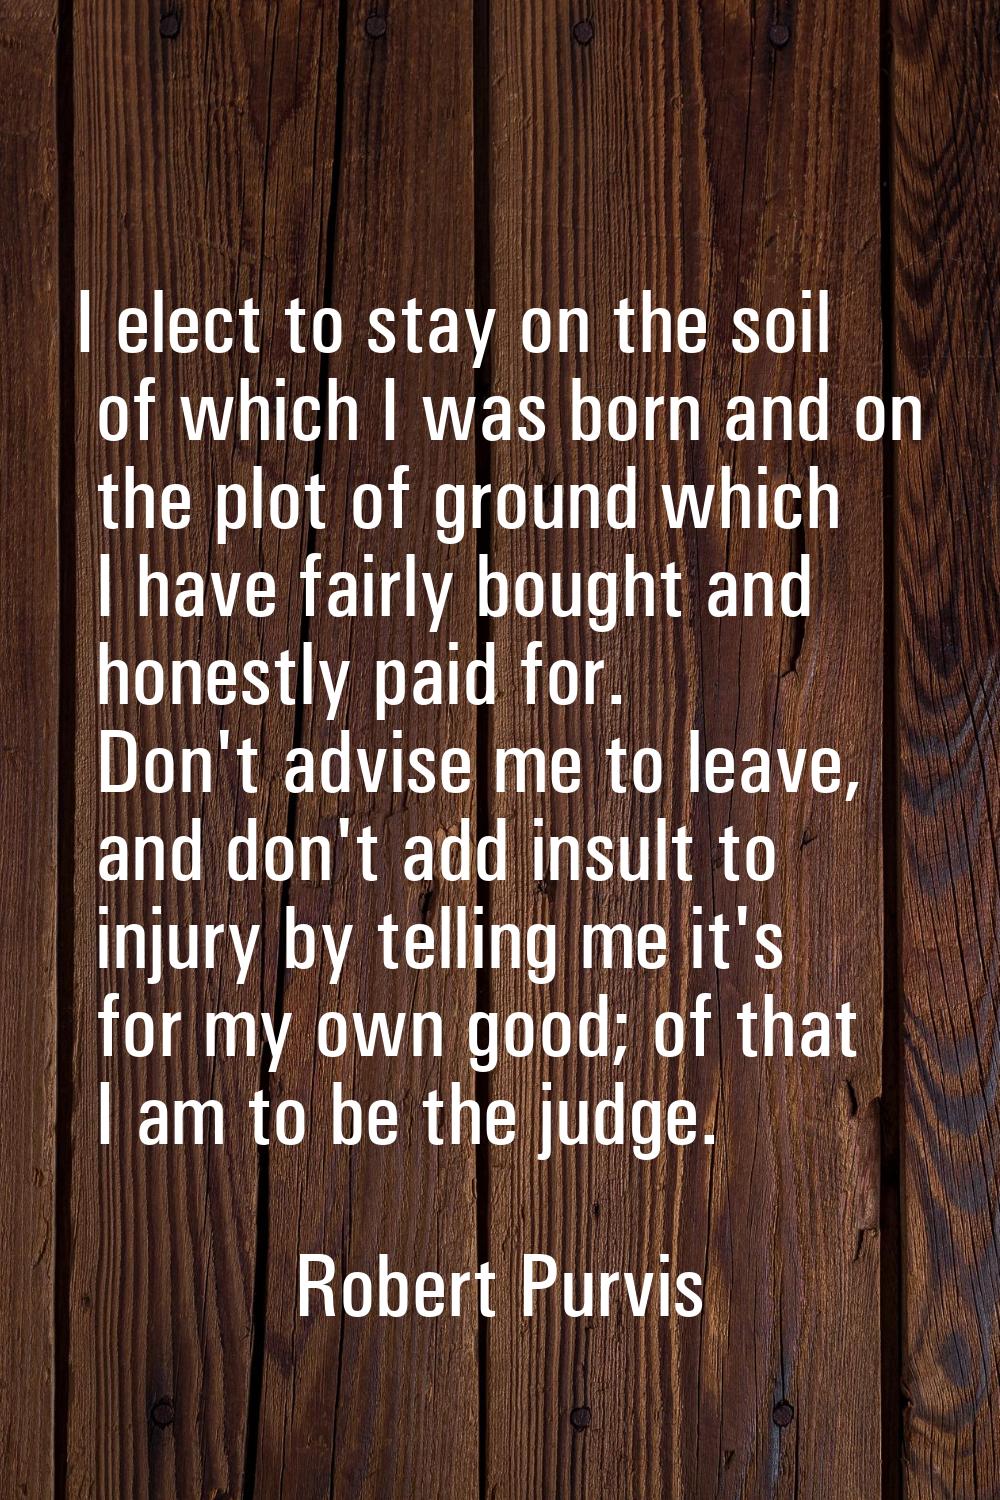 I elect to stay on the soil of which I was born and on the plot of ground which I have fairly bough